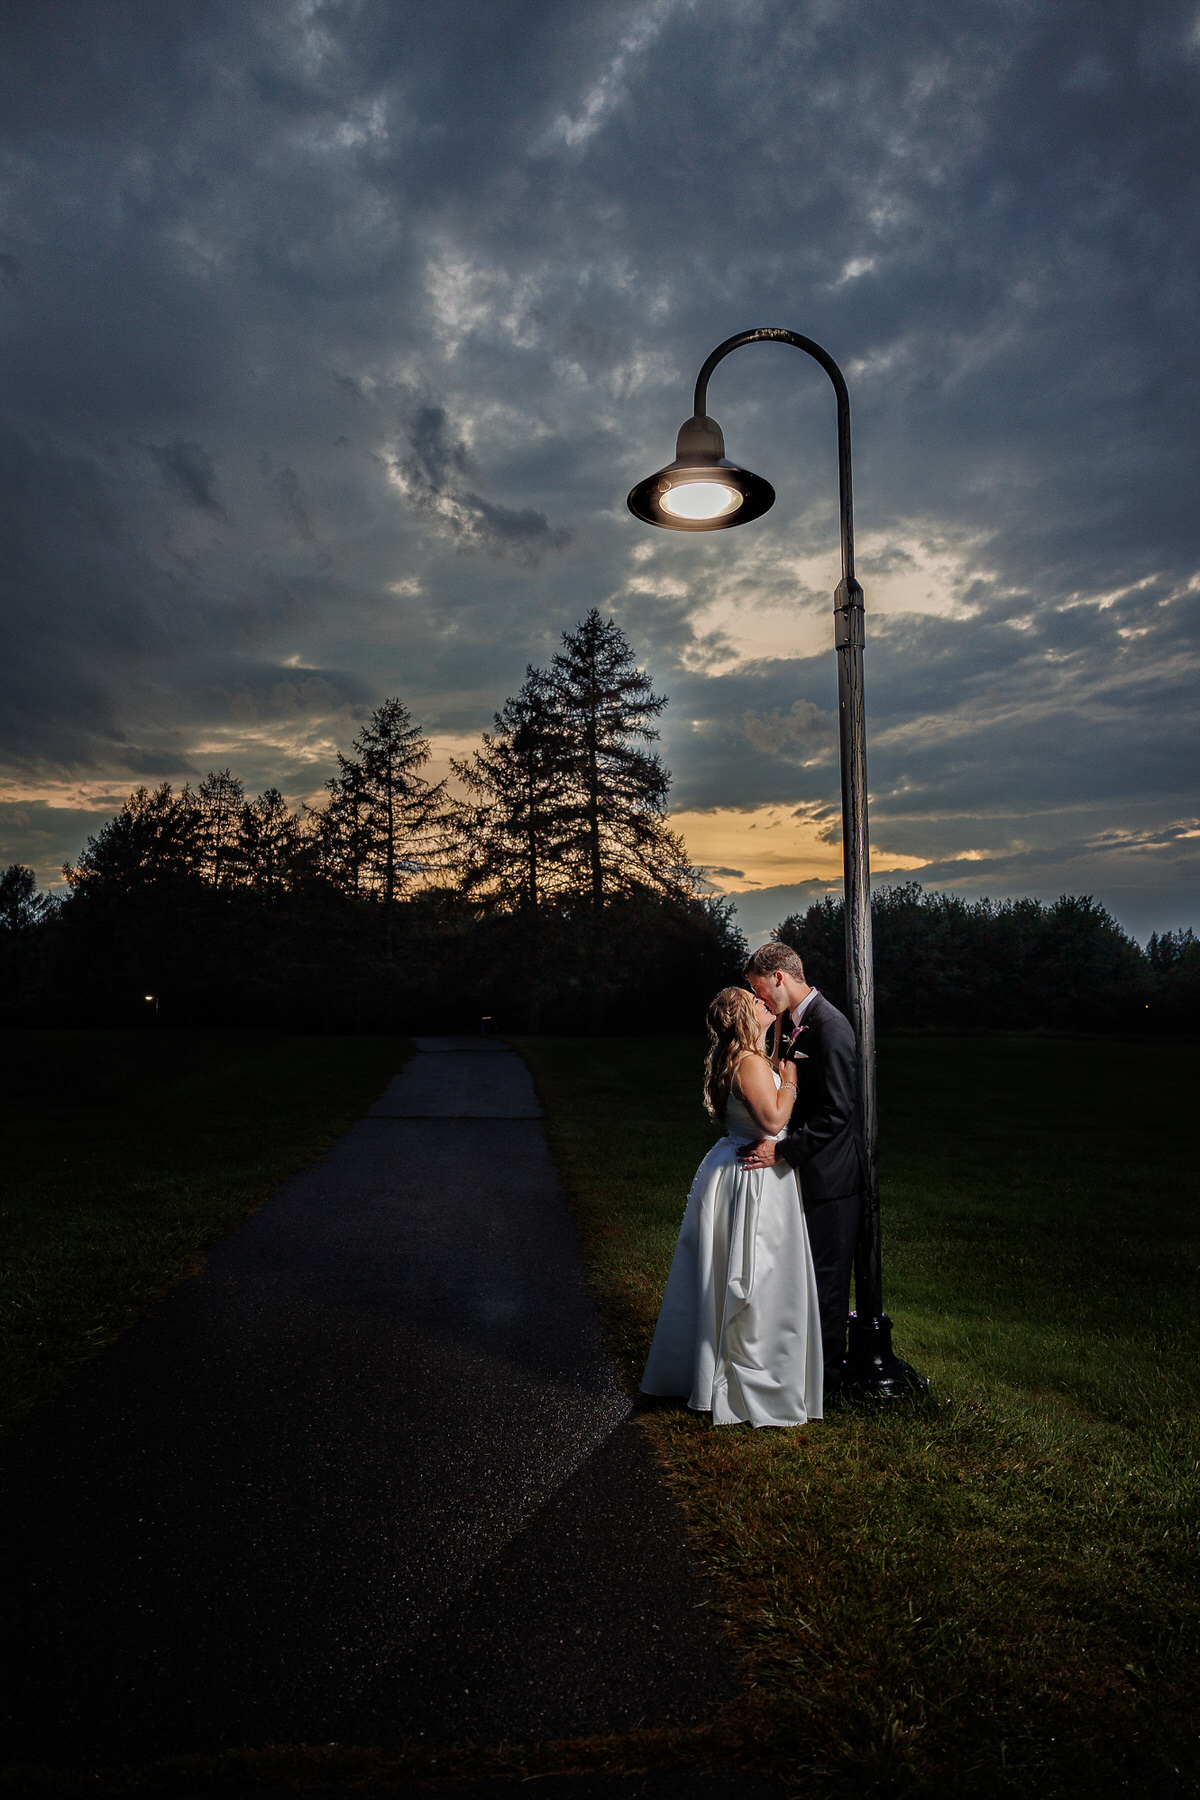 Dramatic photo of bride and groom outside at dusk under lamp post